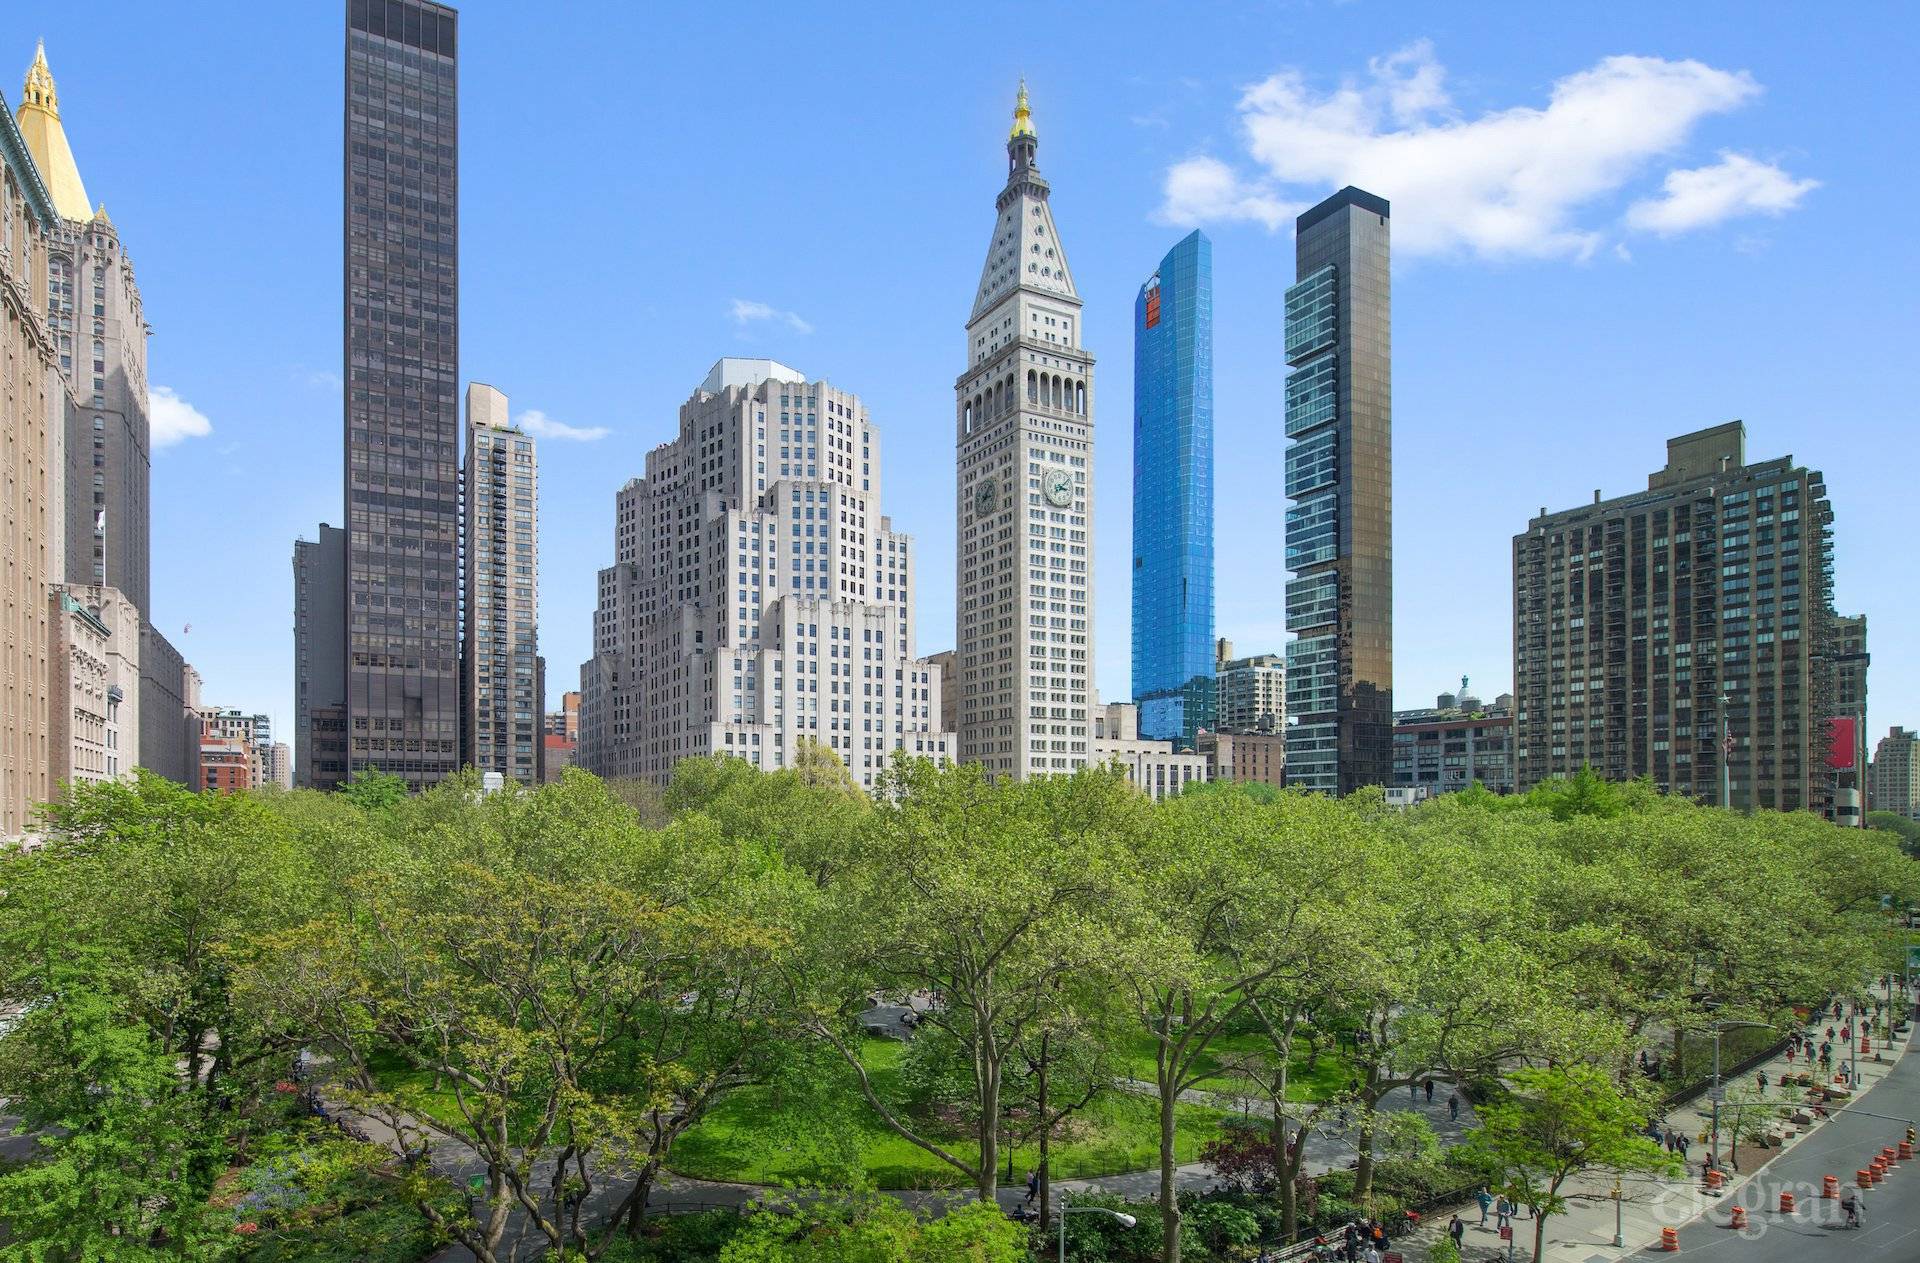 Residence 6A offers 52 feet of direct frontage on Madison Square Park.